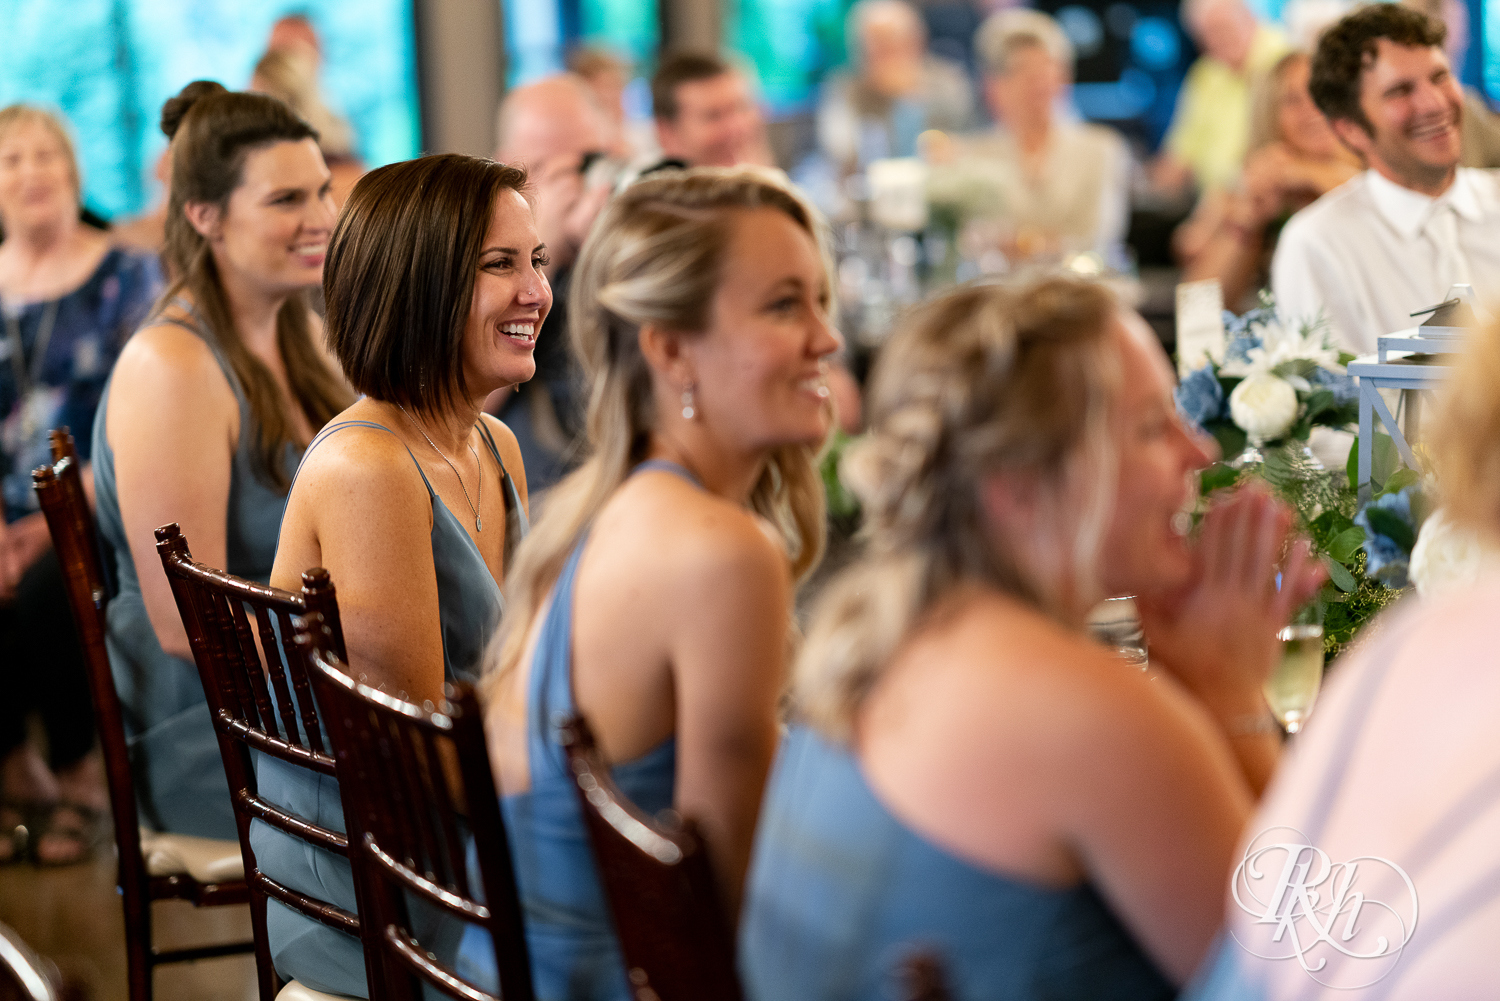 Bridesmaids clapping and laughing during wedding reception at 7 Vines Vineyard in Dellwood, Minnesota.